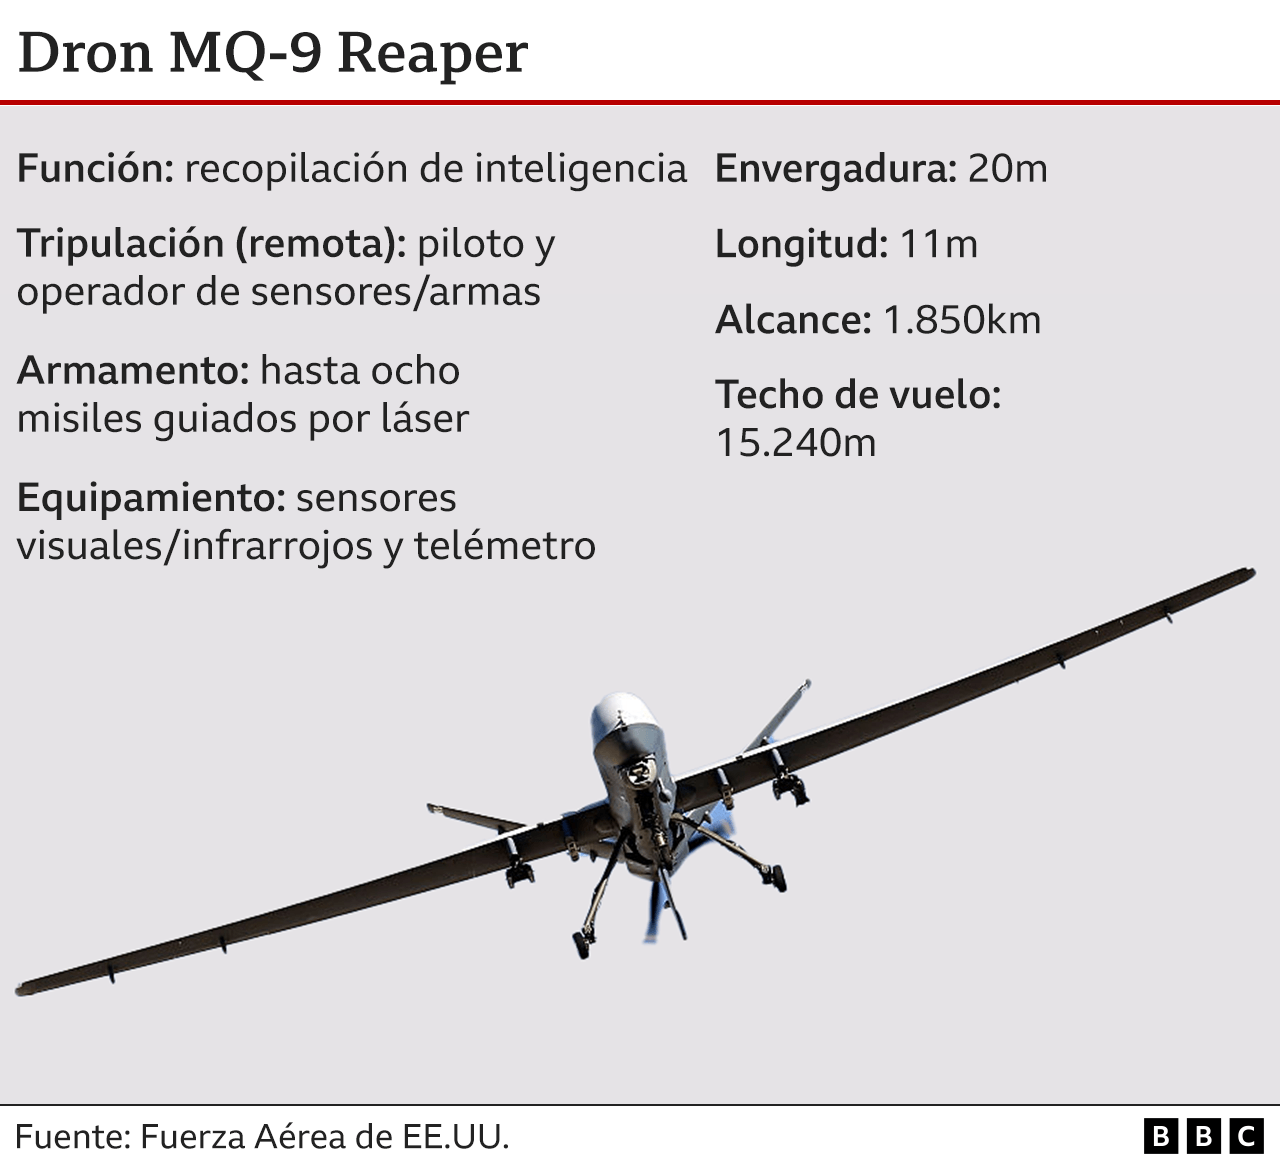 Graphics about the MQ-9 drone.